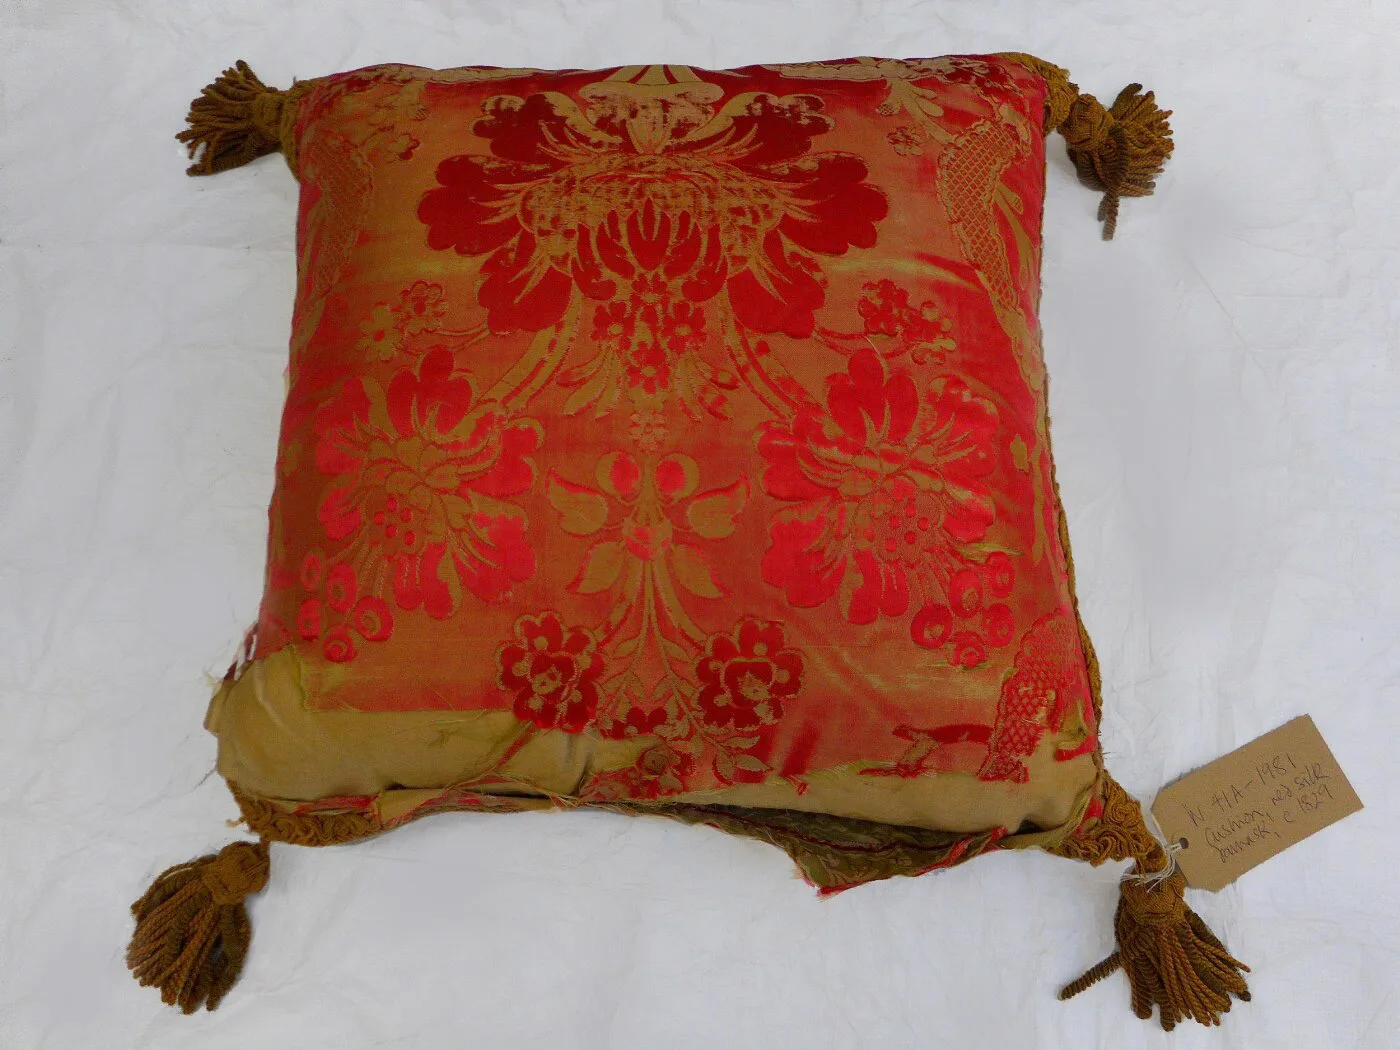 A red and gold cushion